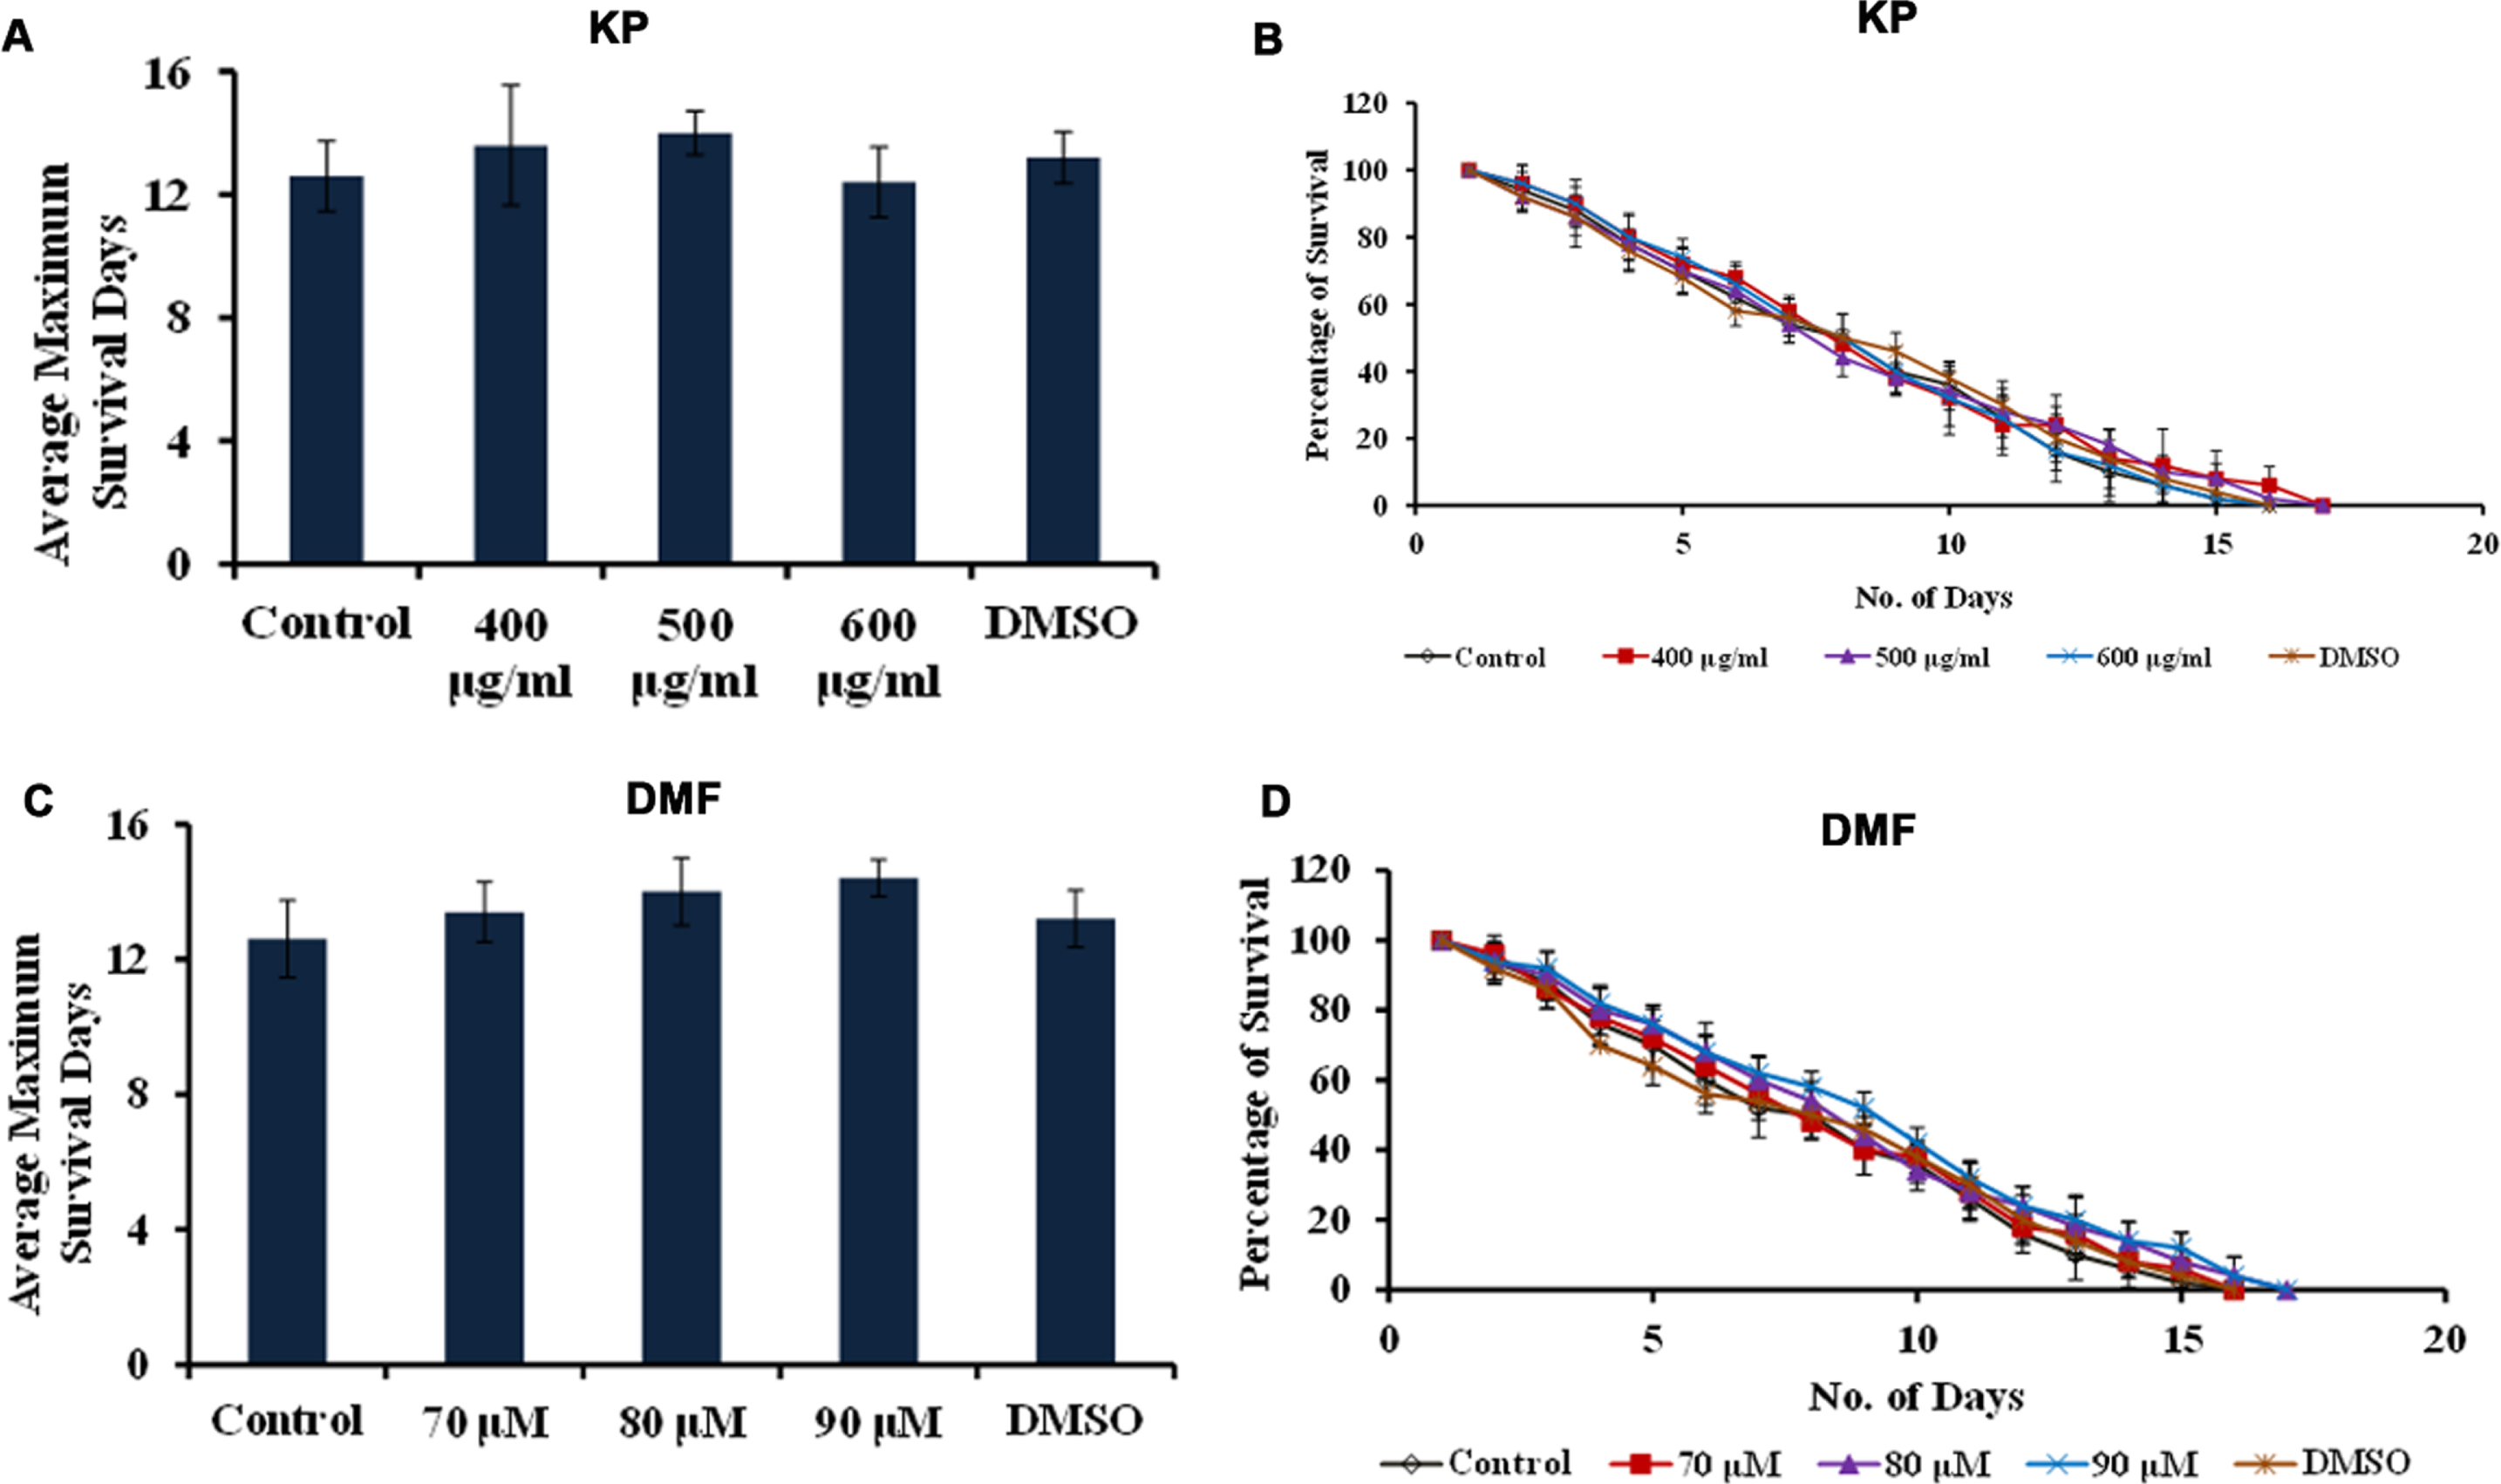 KP and DMF displays DAF-16-dependent increase in lifespan (A) Average maximum lifespan of daf-16 mutants when treated with KP (400 –600μg/ml) (B) Lifespan extension effect of KP (400 –600μg/ml) in daf-16 mutants (C) Average maximum lifespan of daf-16 mutants when treated with DMF (70 –90μM) (D) Lifespan extension effect of KP (400 –600μg/ml) in daf-16 mutants.